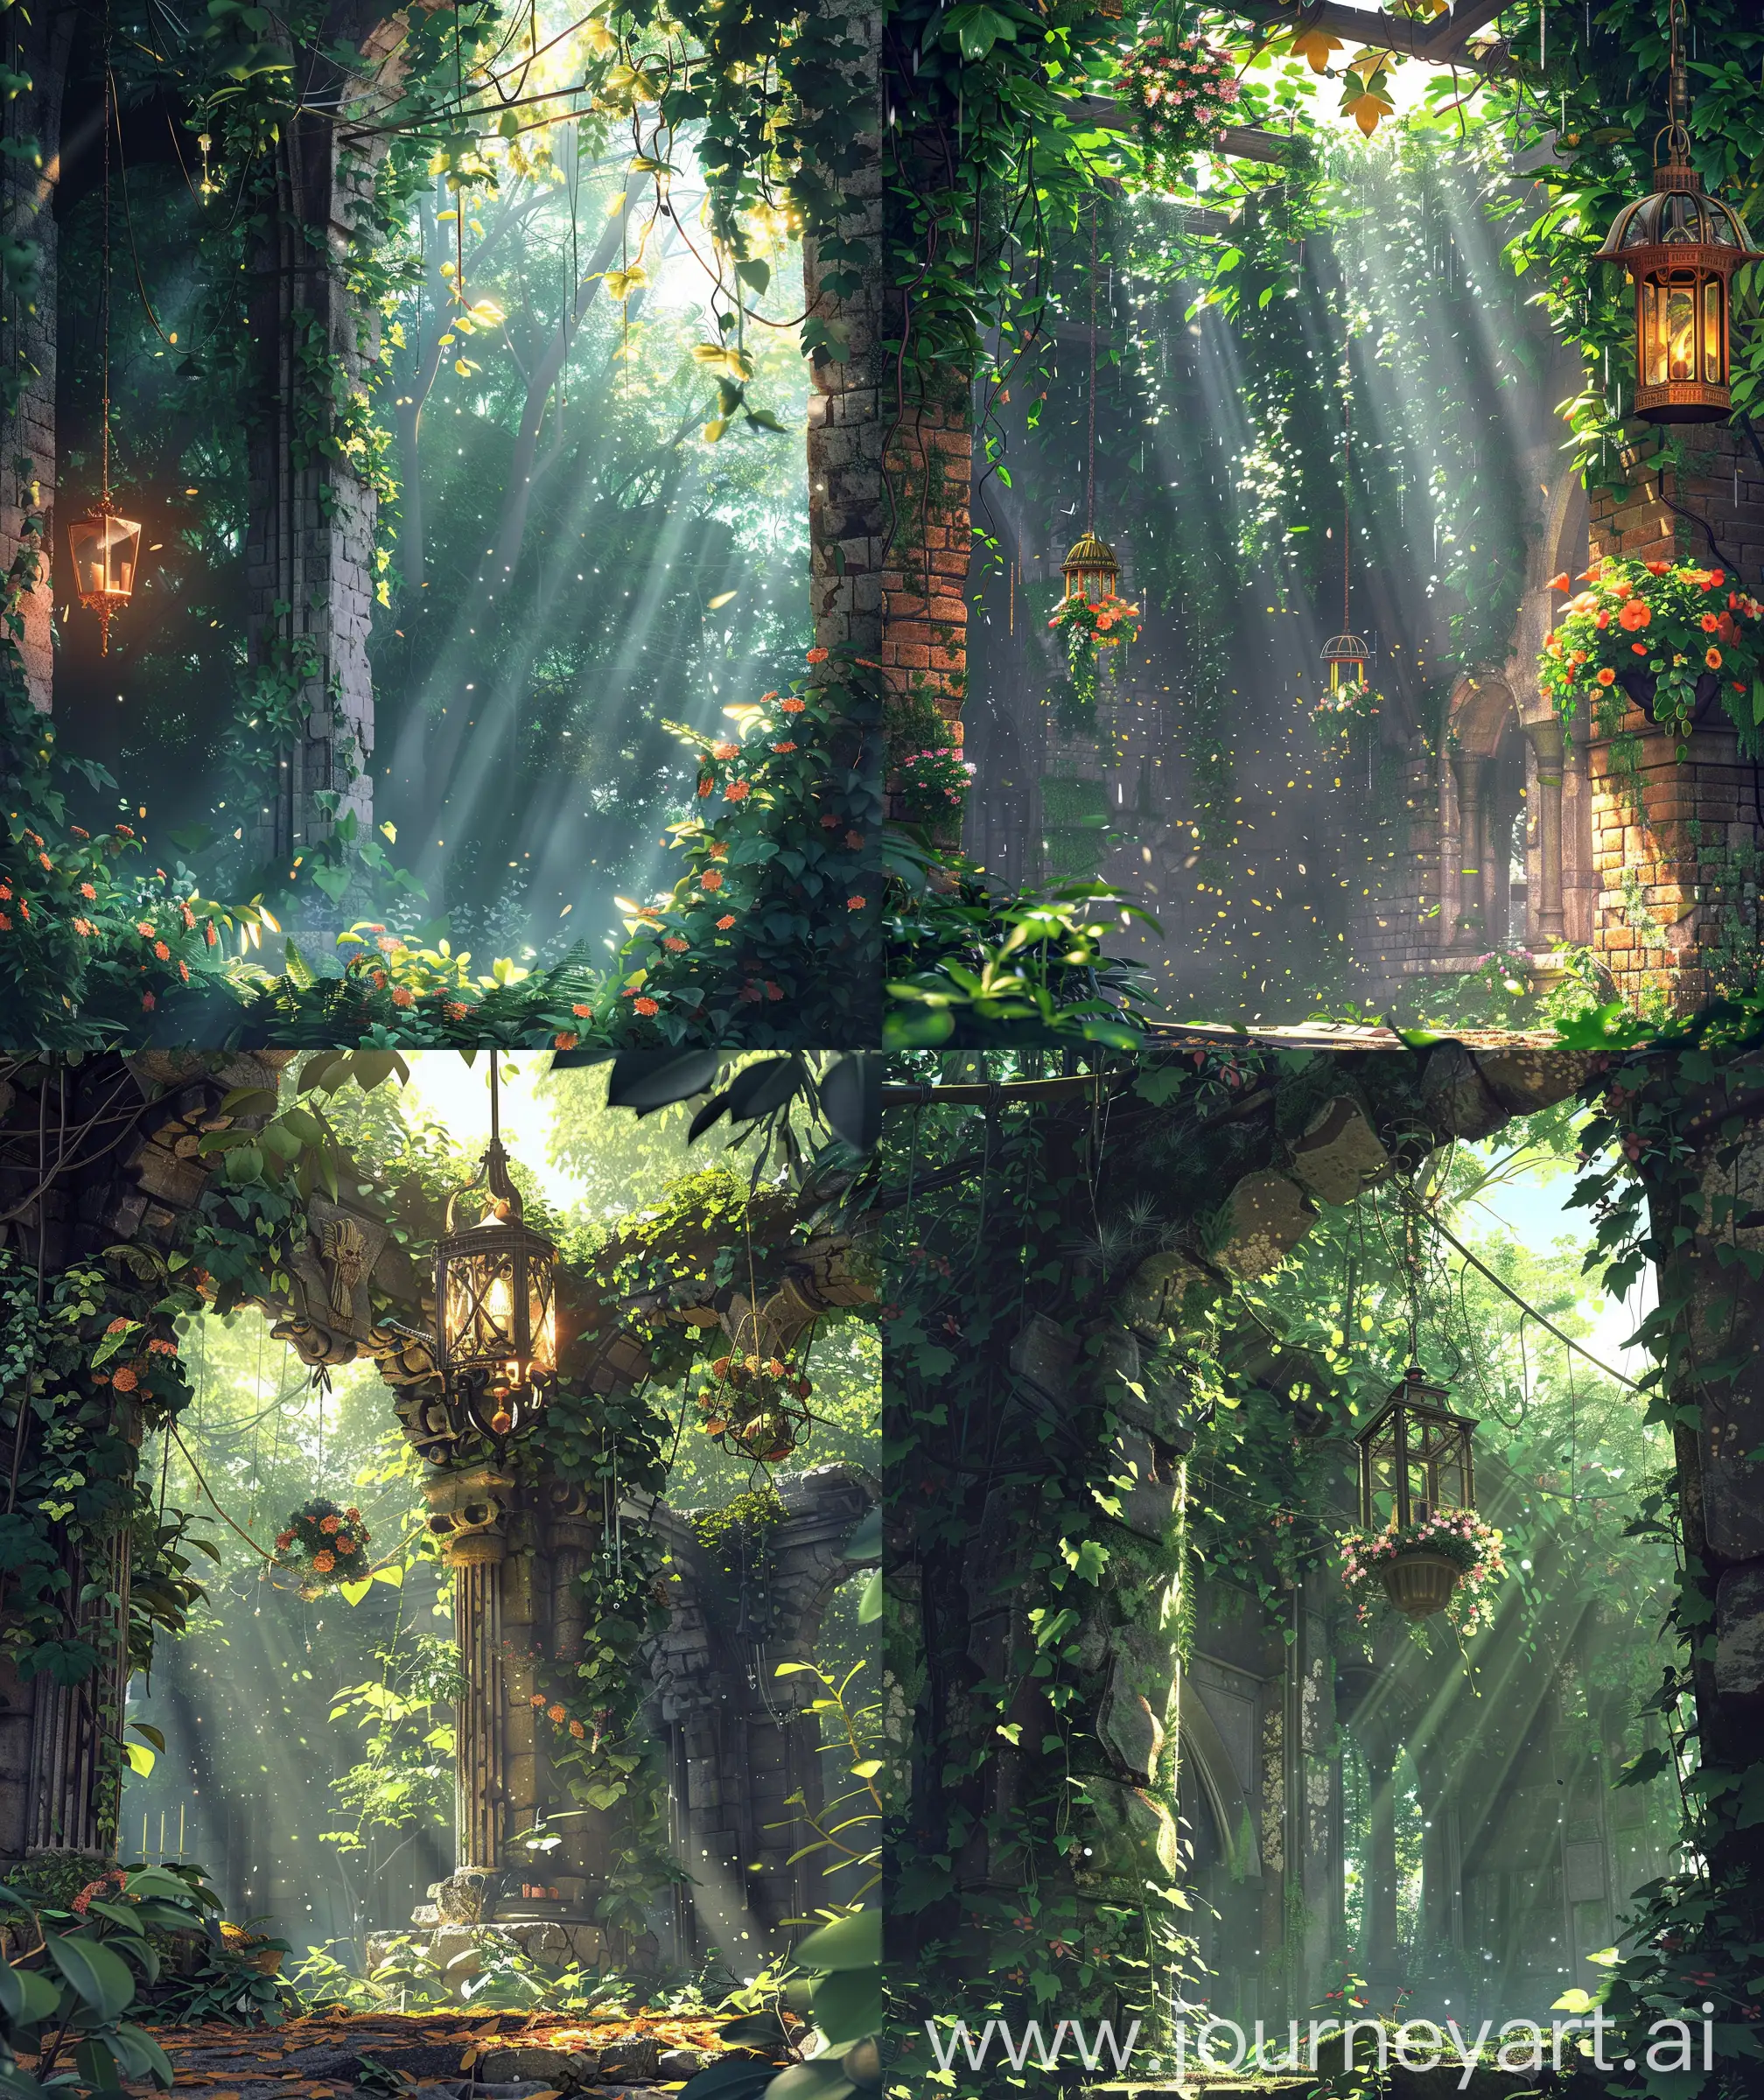 Beautiful anime view, illustration, "abundance ruin, overgrown with Bougainville plant and ivy", hanging lamp and flowers decoration, forest, fantasy anime view, sunlight through leaves, , glistening atmosphere, anime scenary, beautiful "direct front view facade", Ultra hd, sharp details, no hyperrealistic --ar 27:32